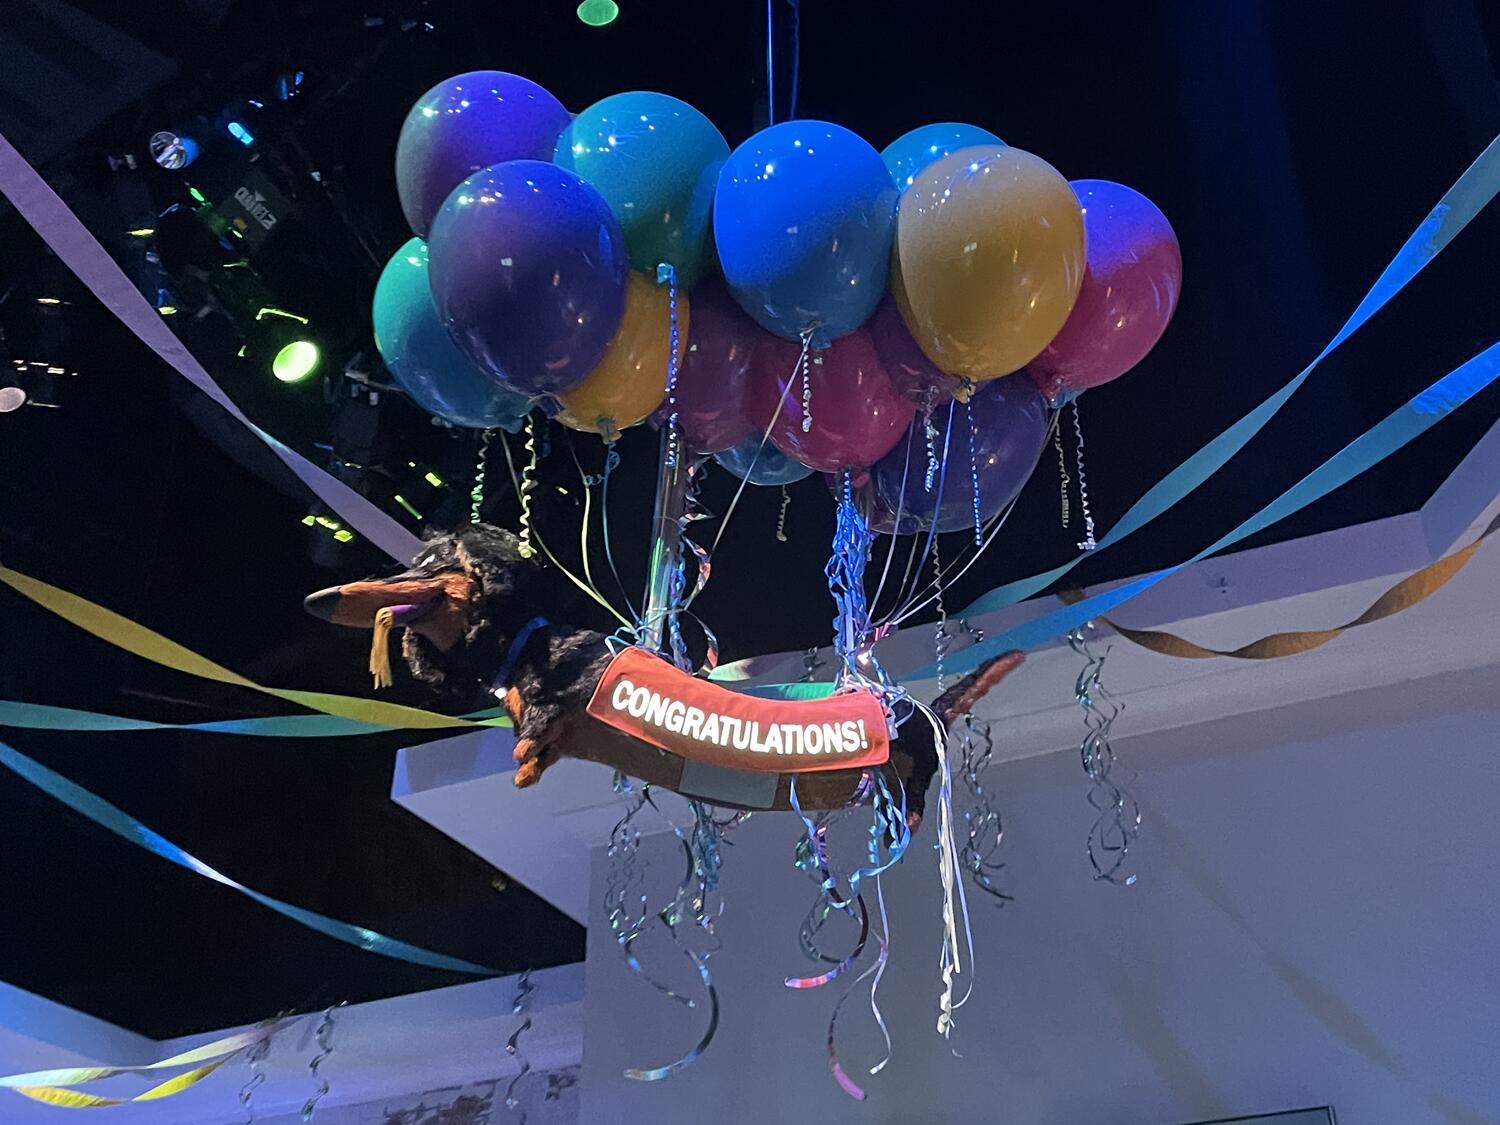 An animatronic dachsund suspended by colorful balloons and wearing a jacket that reads "CONGRATULATIONS!"